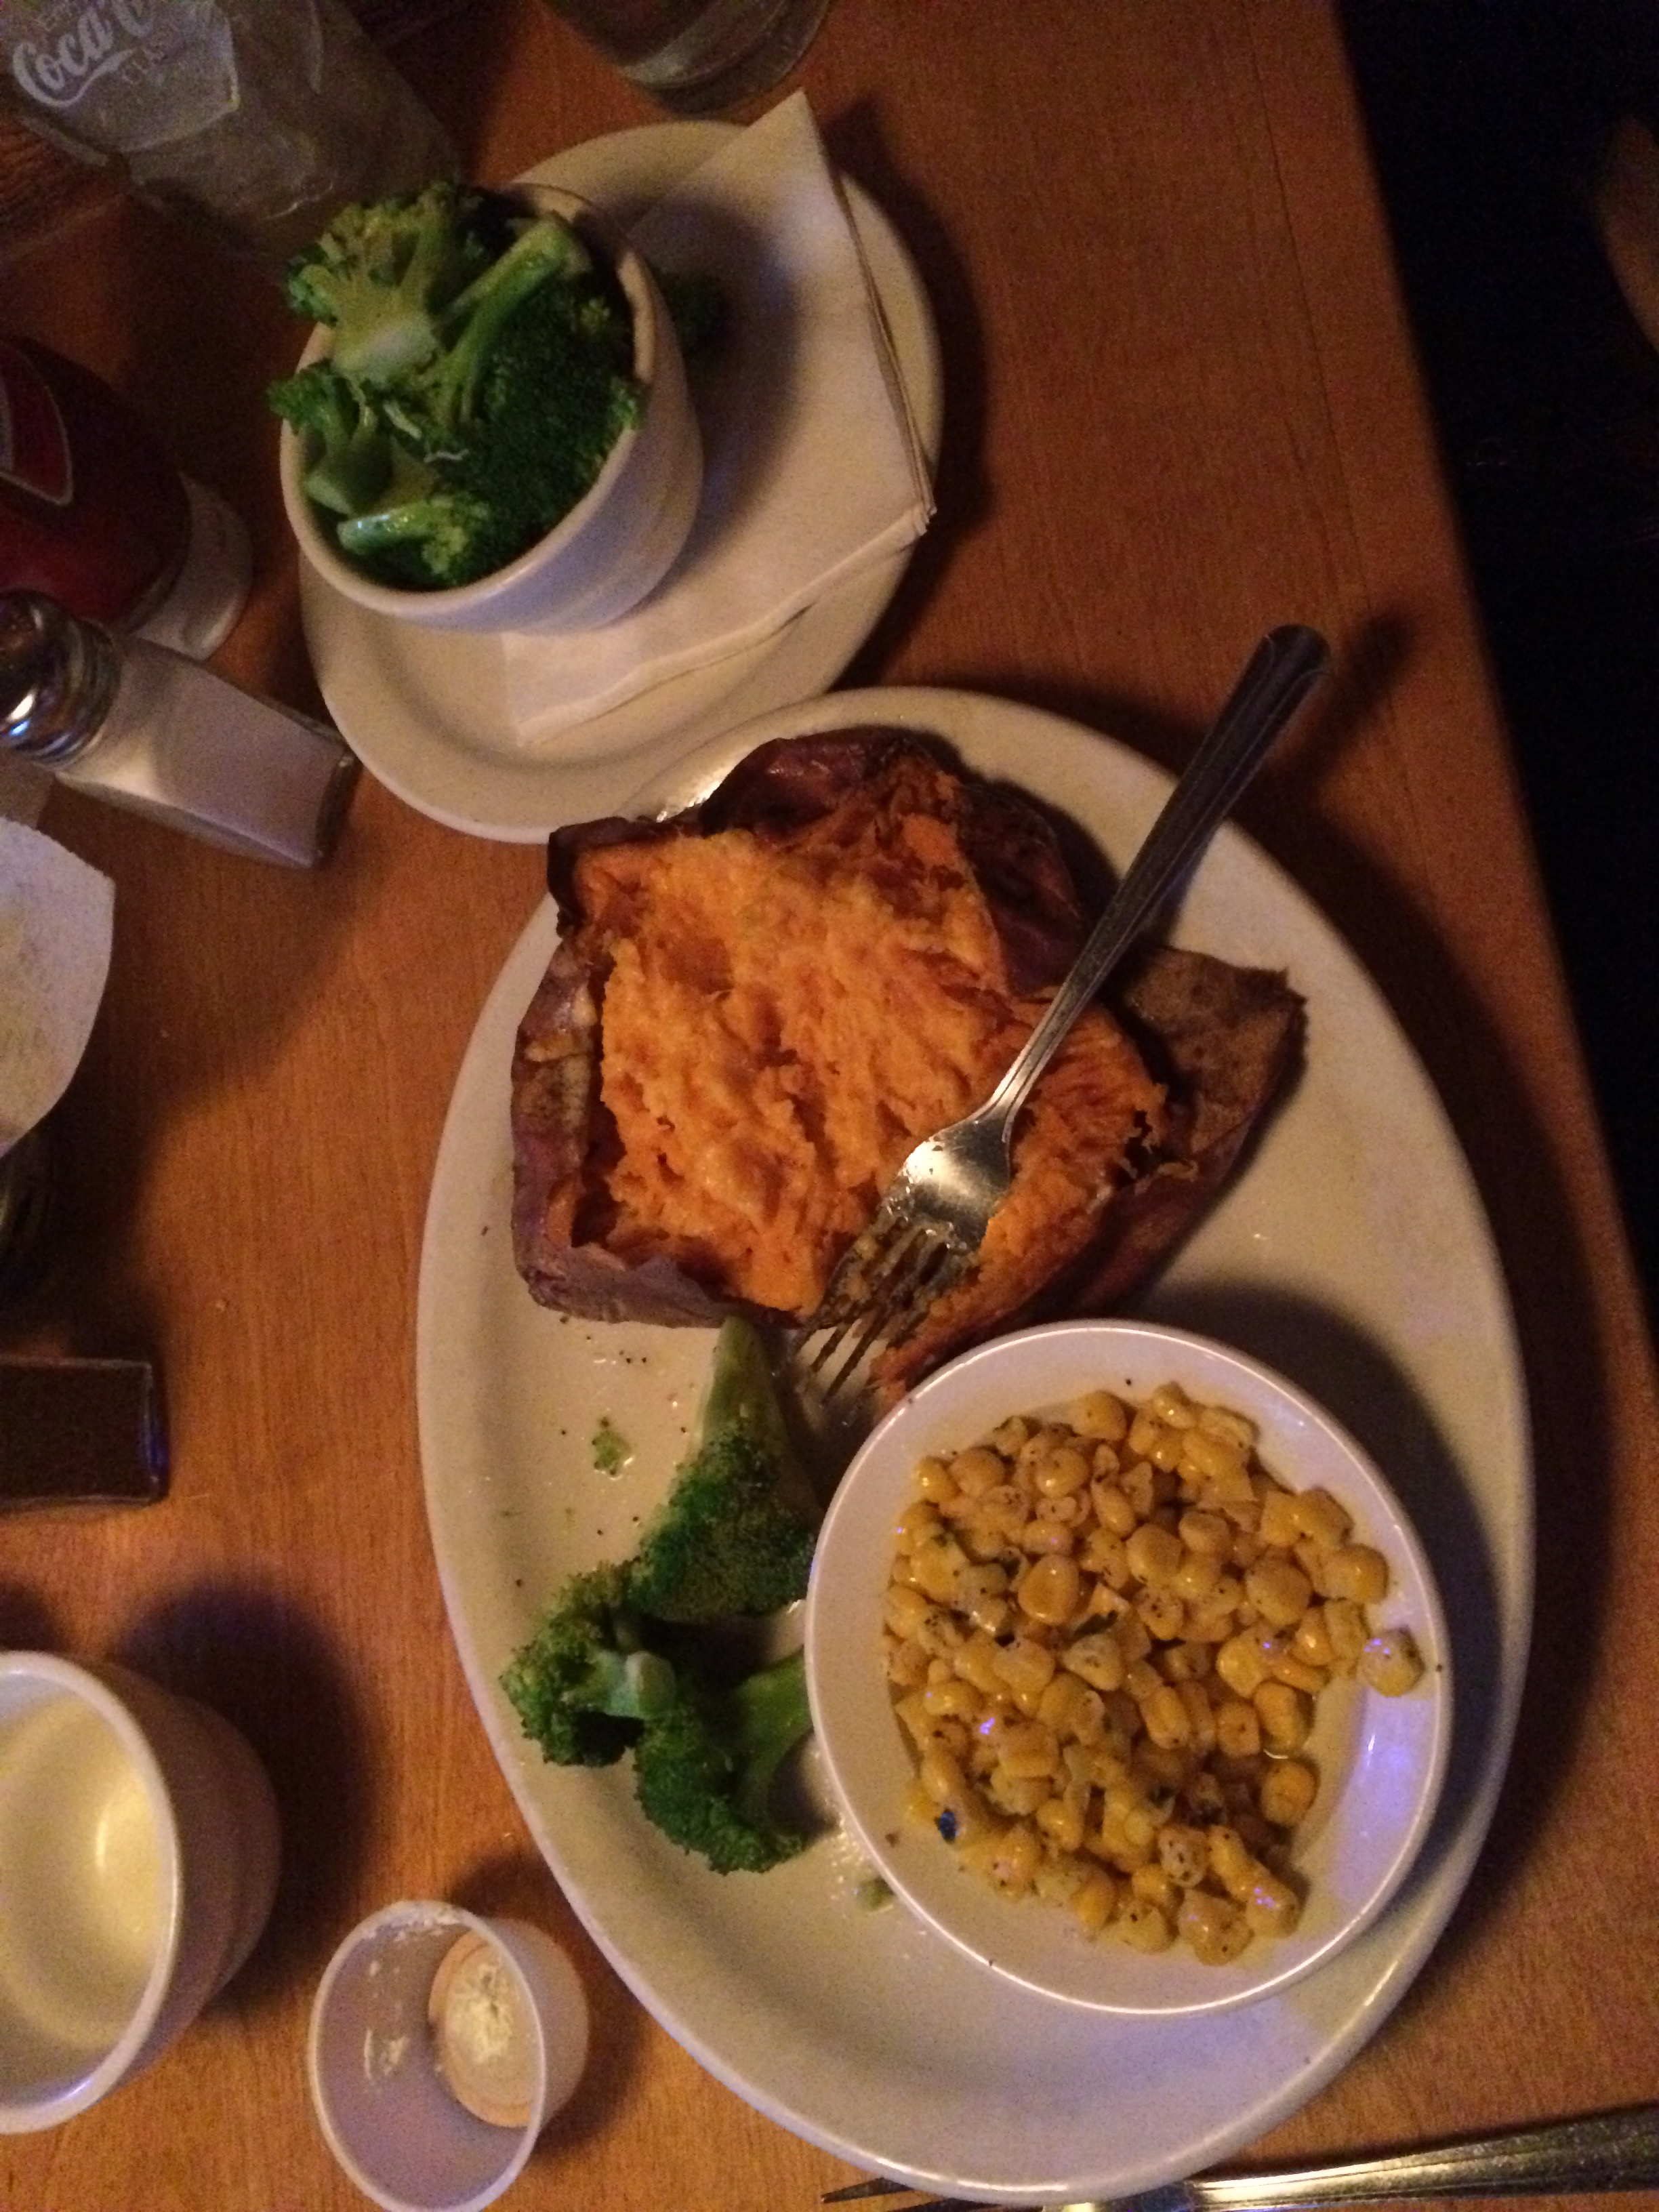 So you’re going to Texas Roadhouse for dinner… | Happy, Healthy, Plant